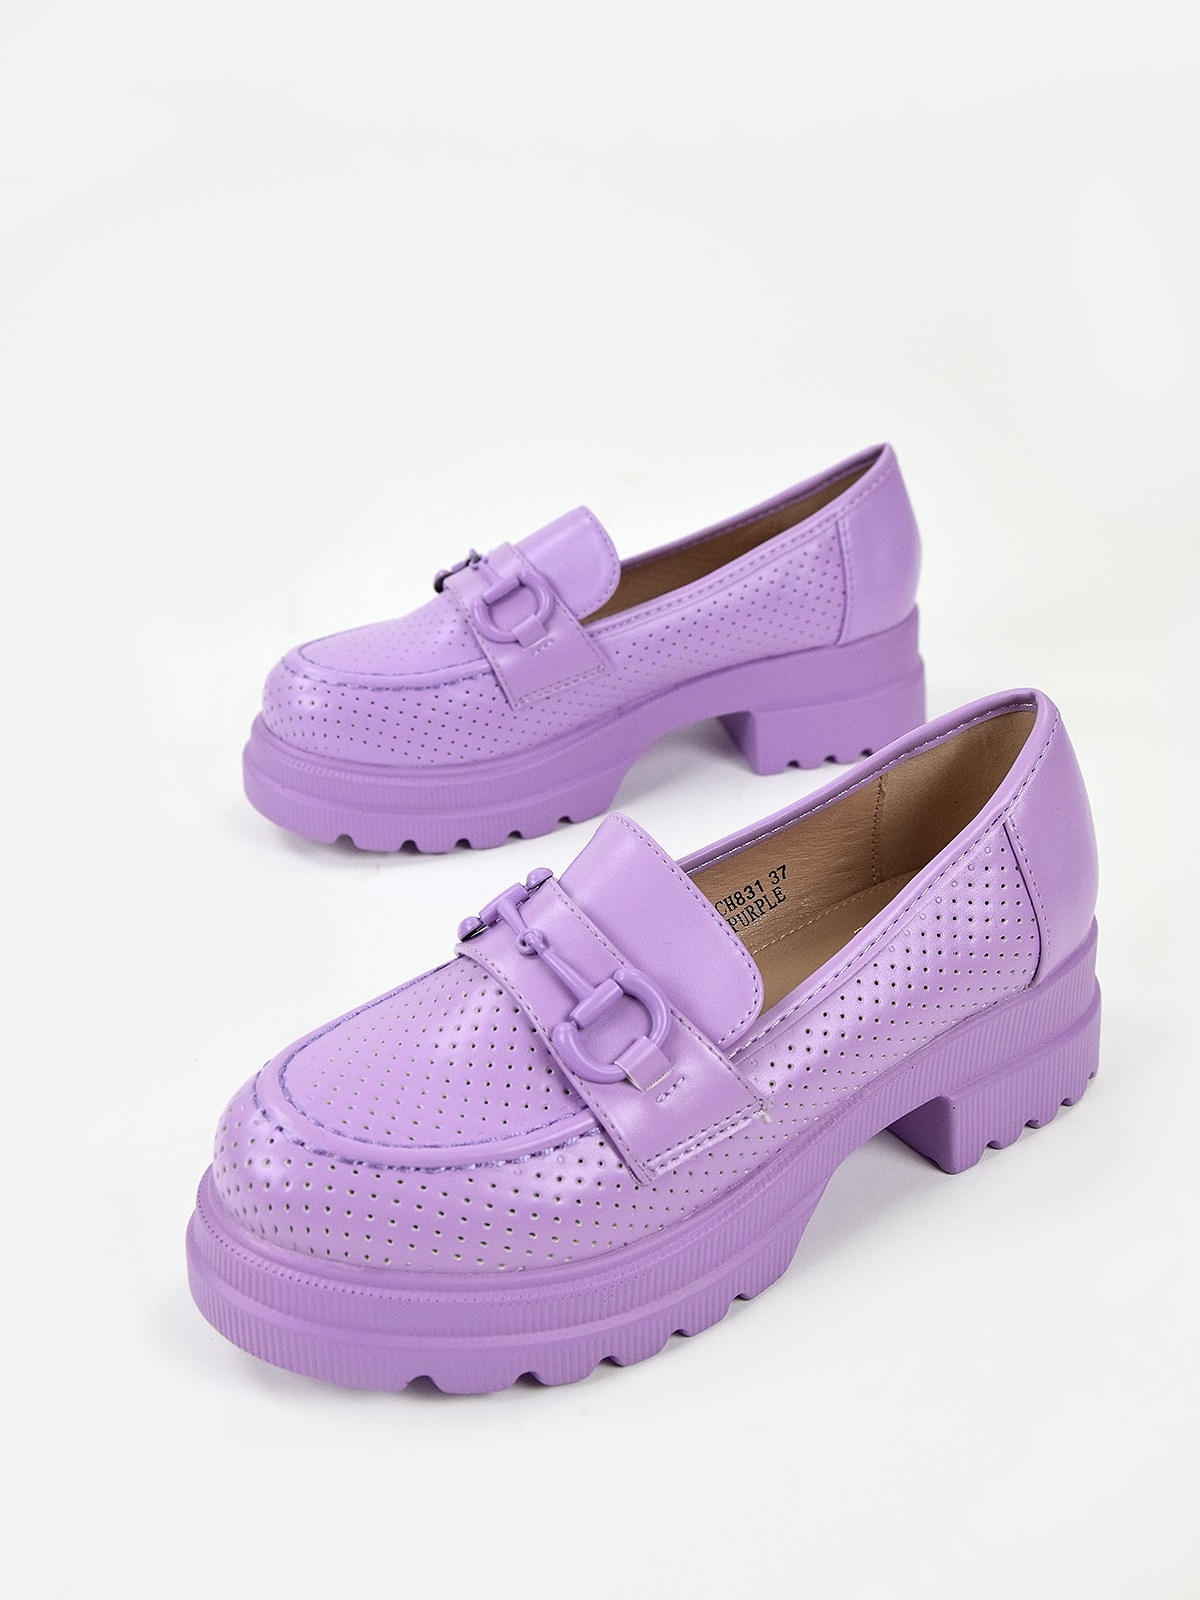 Chunky loafers with front metal trim in purple